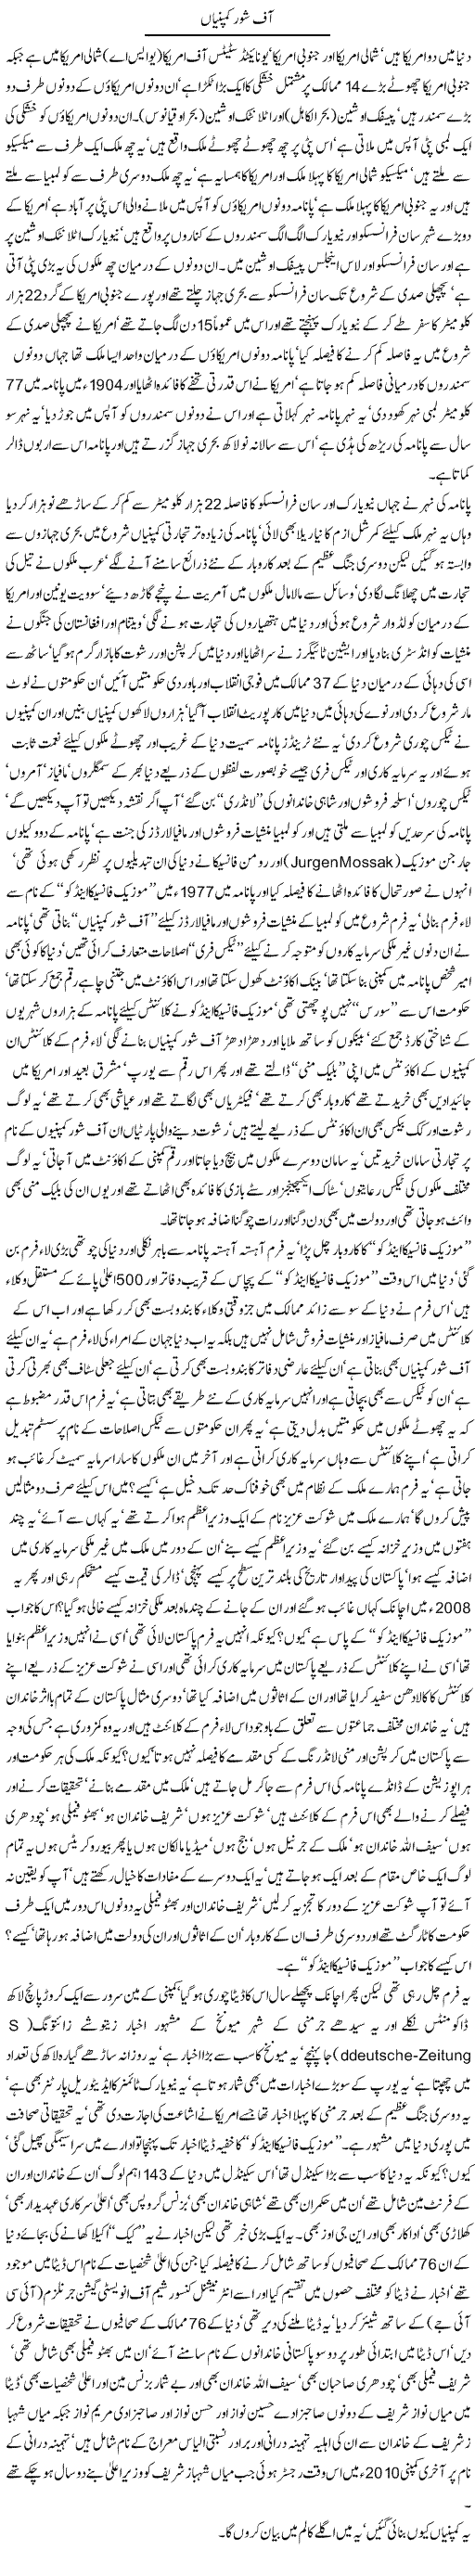 Offshore company By Javed Chaudhry